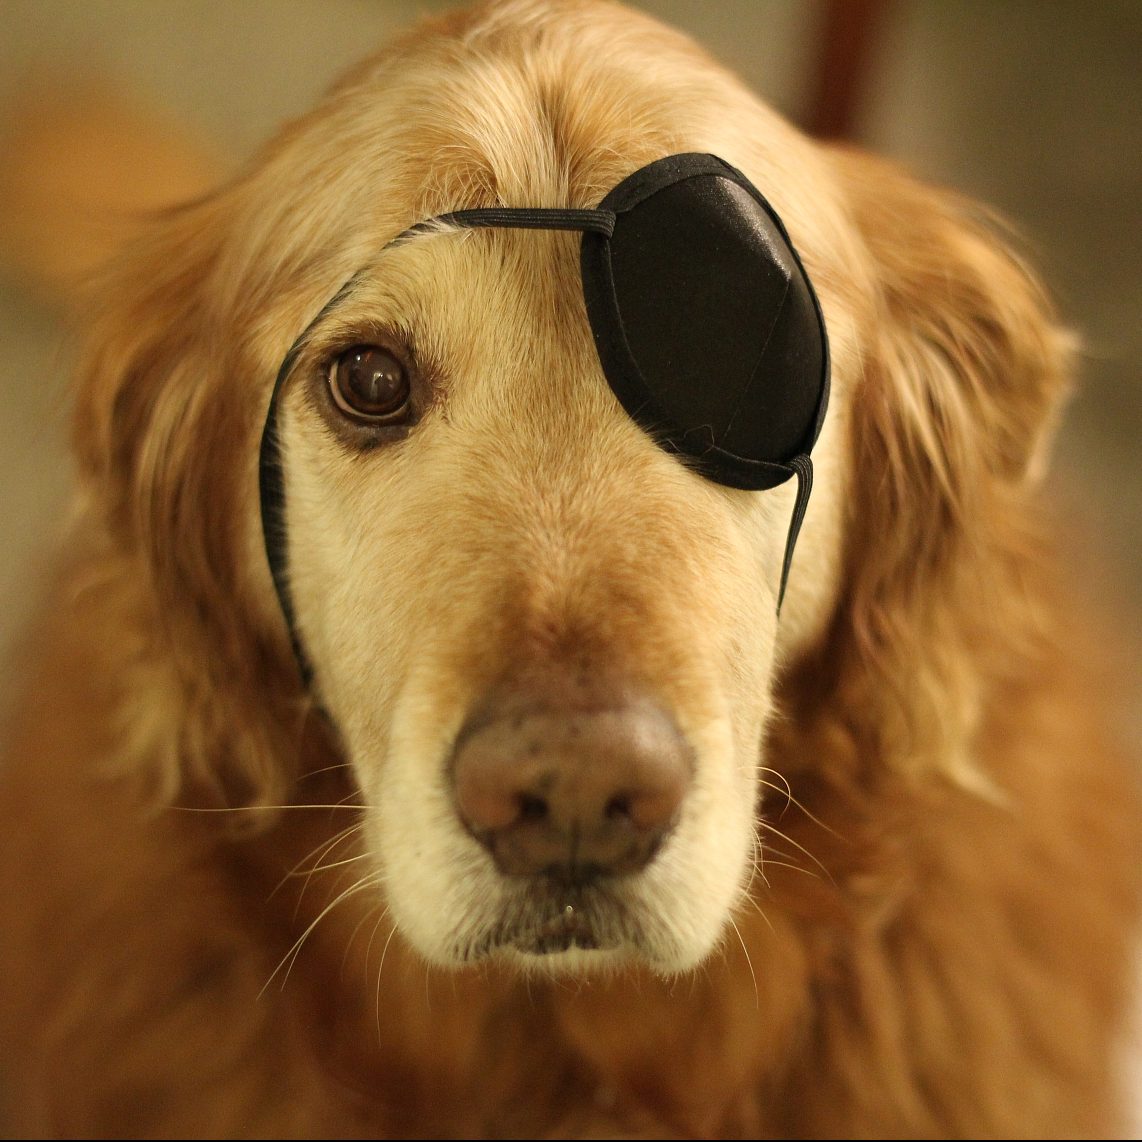 Golden Retriever, Fluffster, looking at camera with eye patch